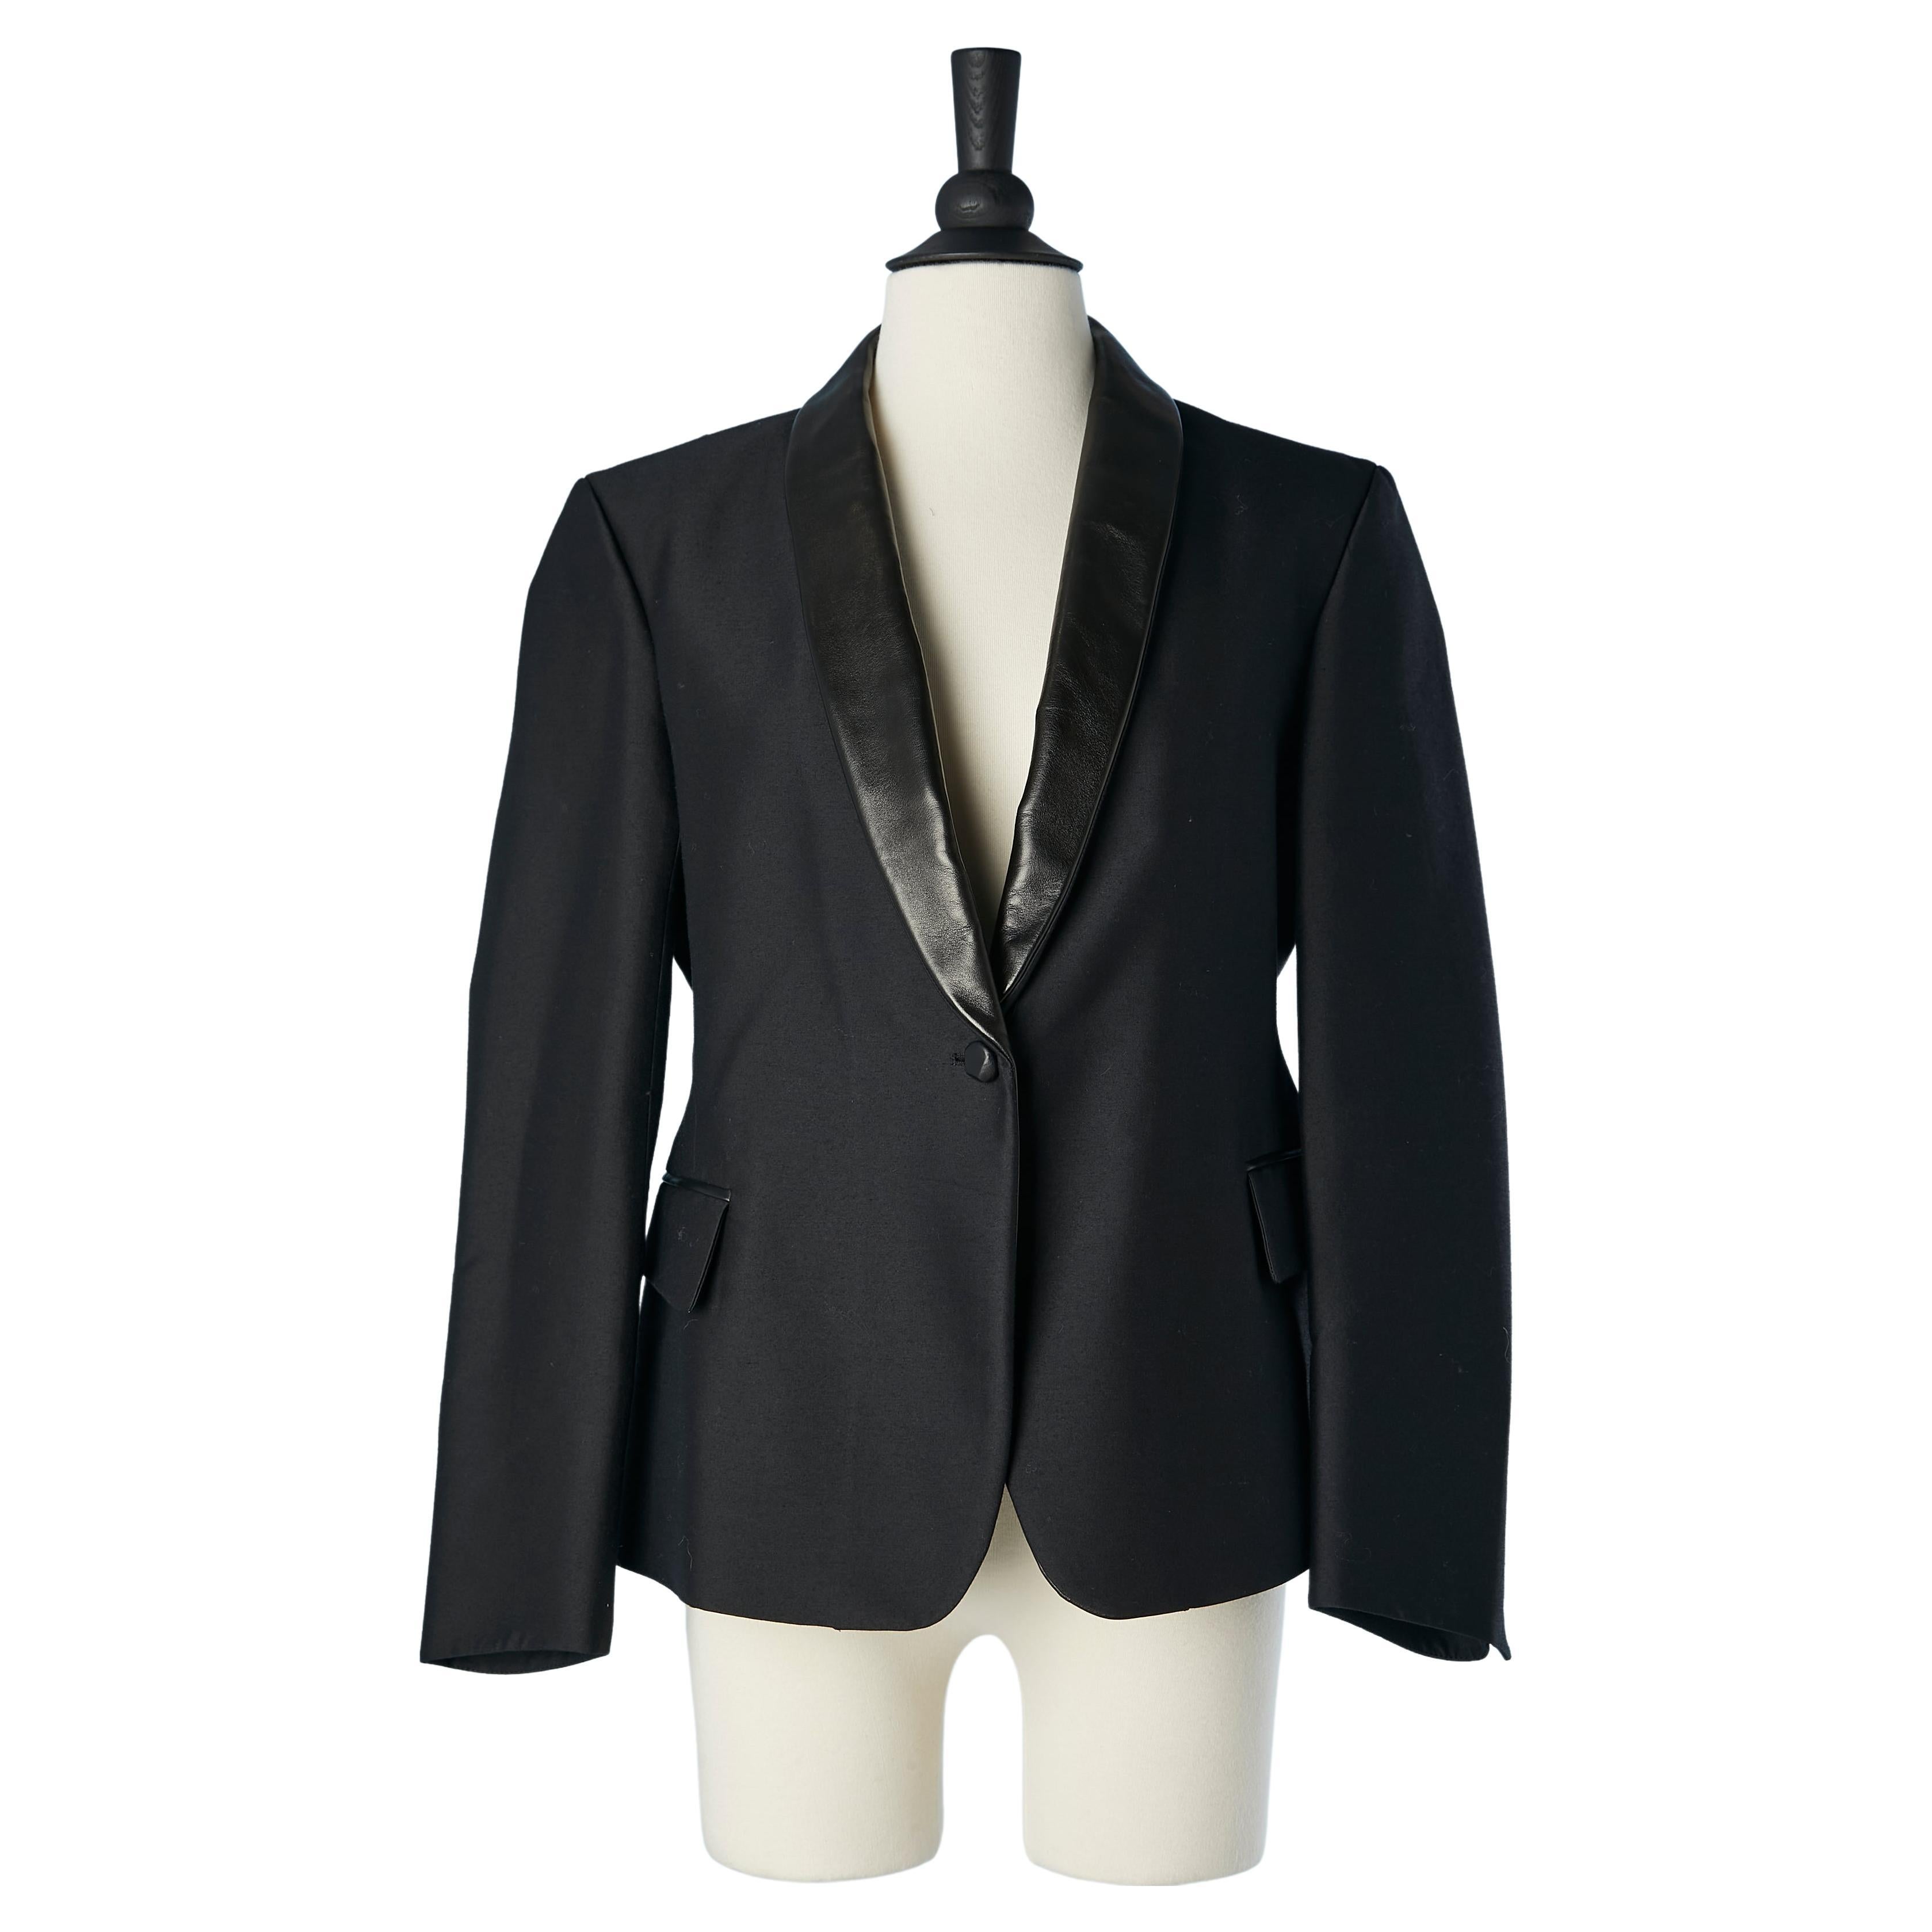 Black wool single-breasted tuxedo with black leather collar Yves Saint Laurent 